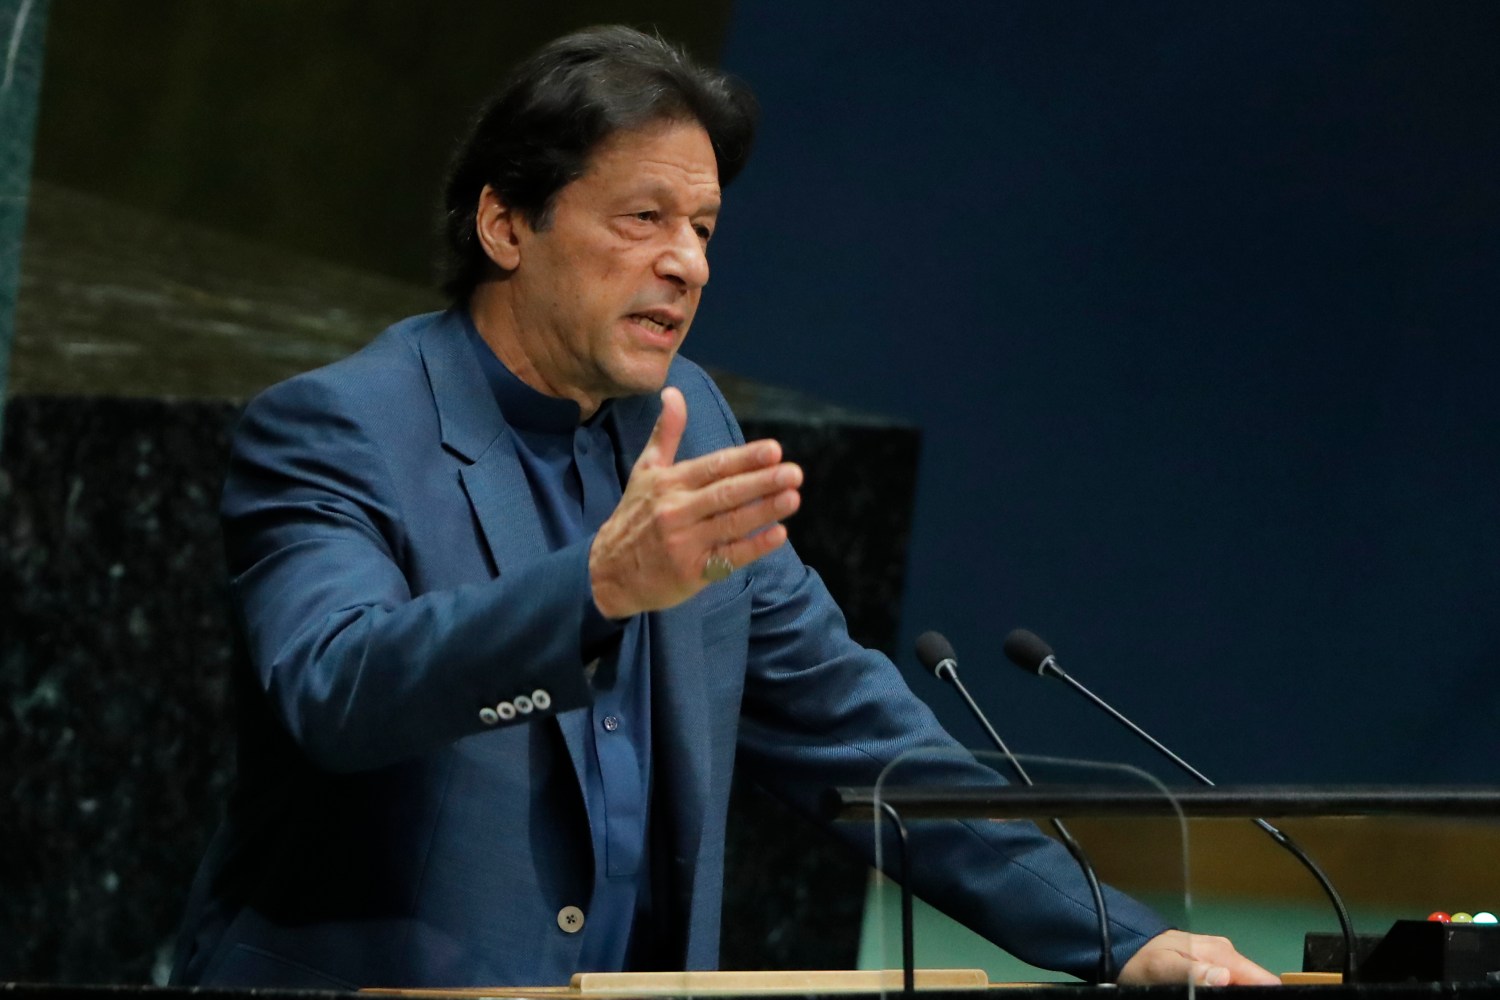 Imran Khan, Prime Minister of Pakistan addresses the 74th session of the United Nations General Assembly at U.N. headquarters in New York, U.S., September 27, 2019. REUTERS/Brendan Mcdermid - HP1EF9R1627O7